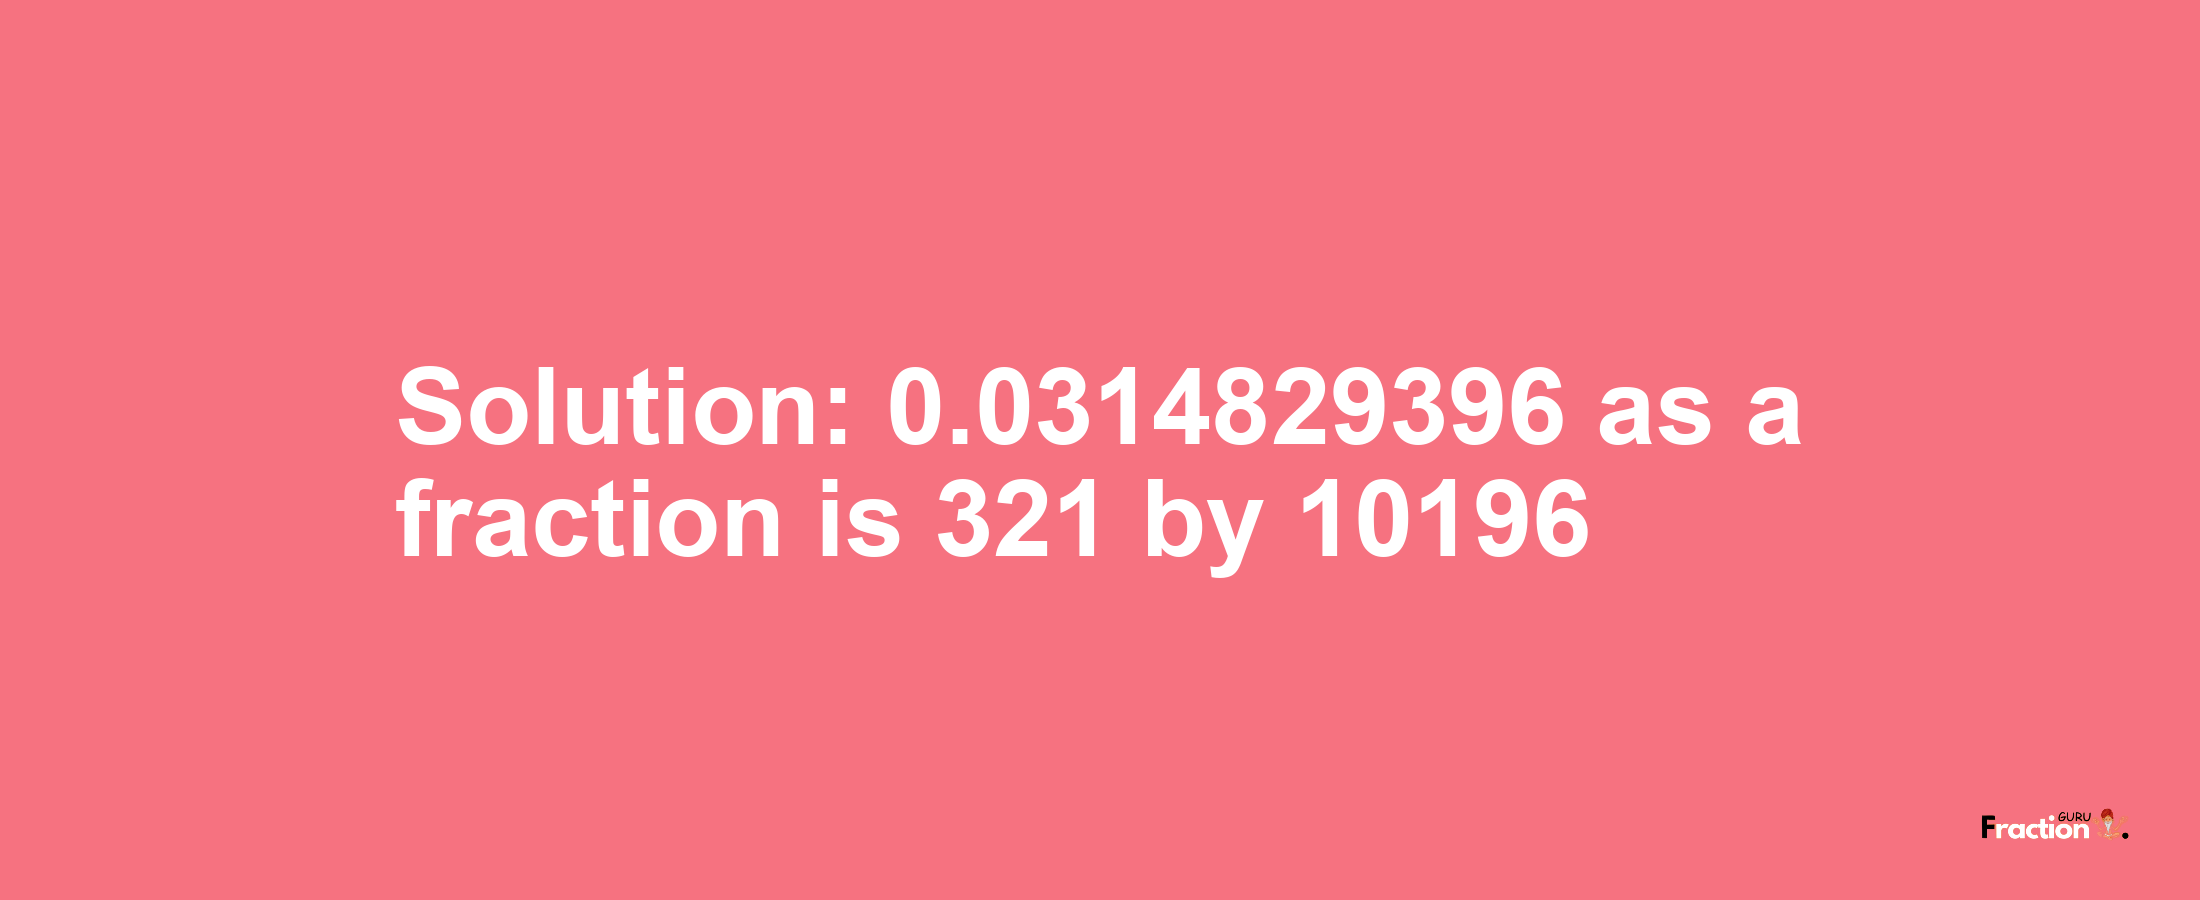 Solution:0.0314829396 as a fraction is 321/10196